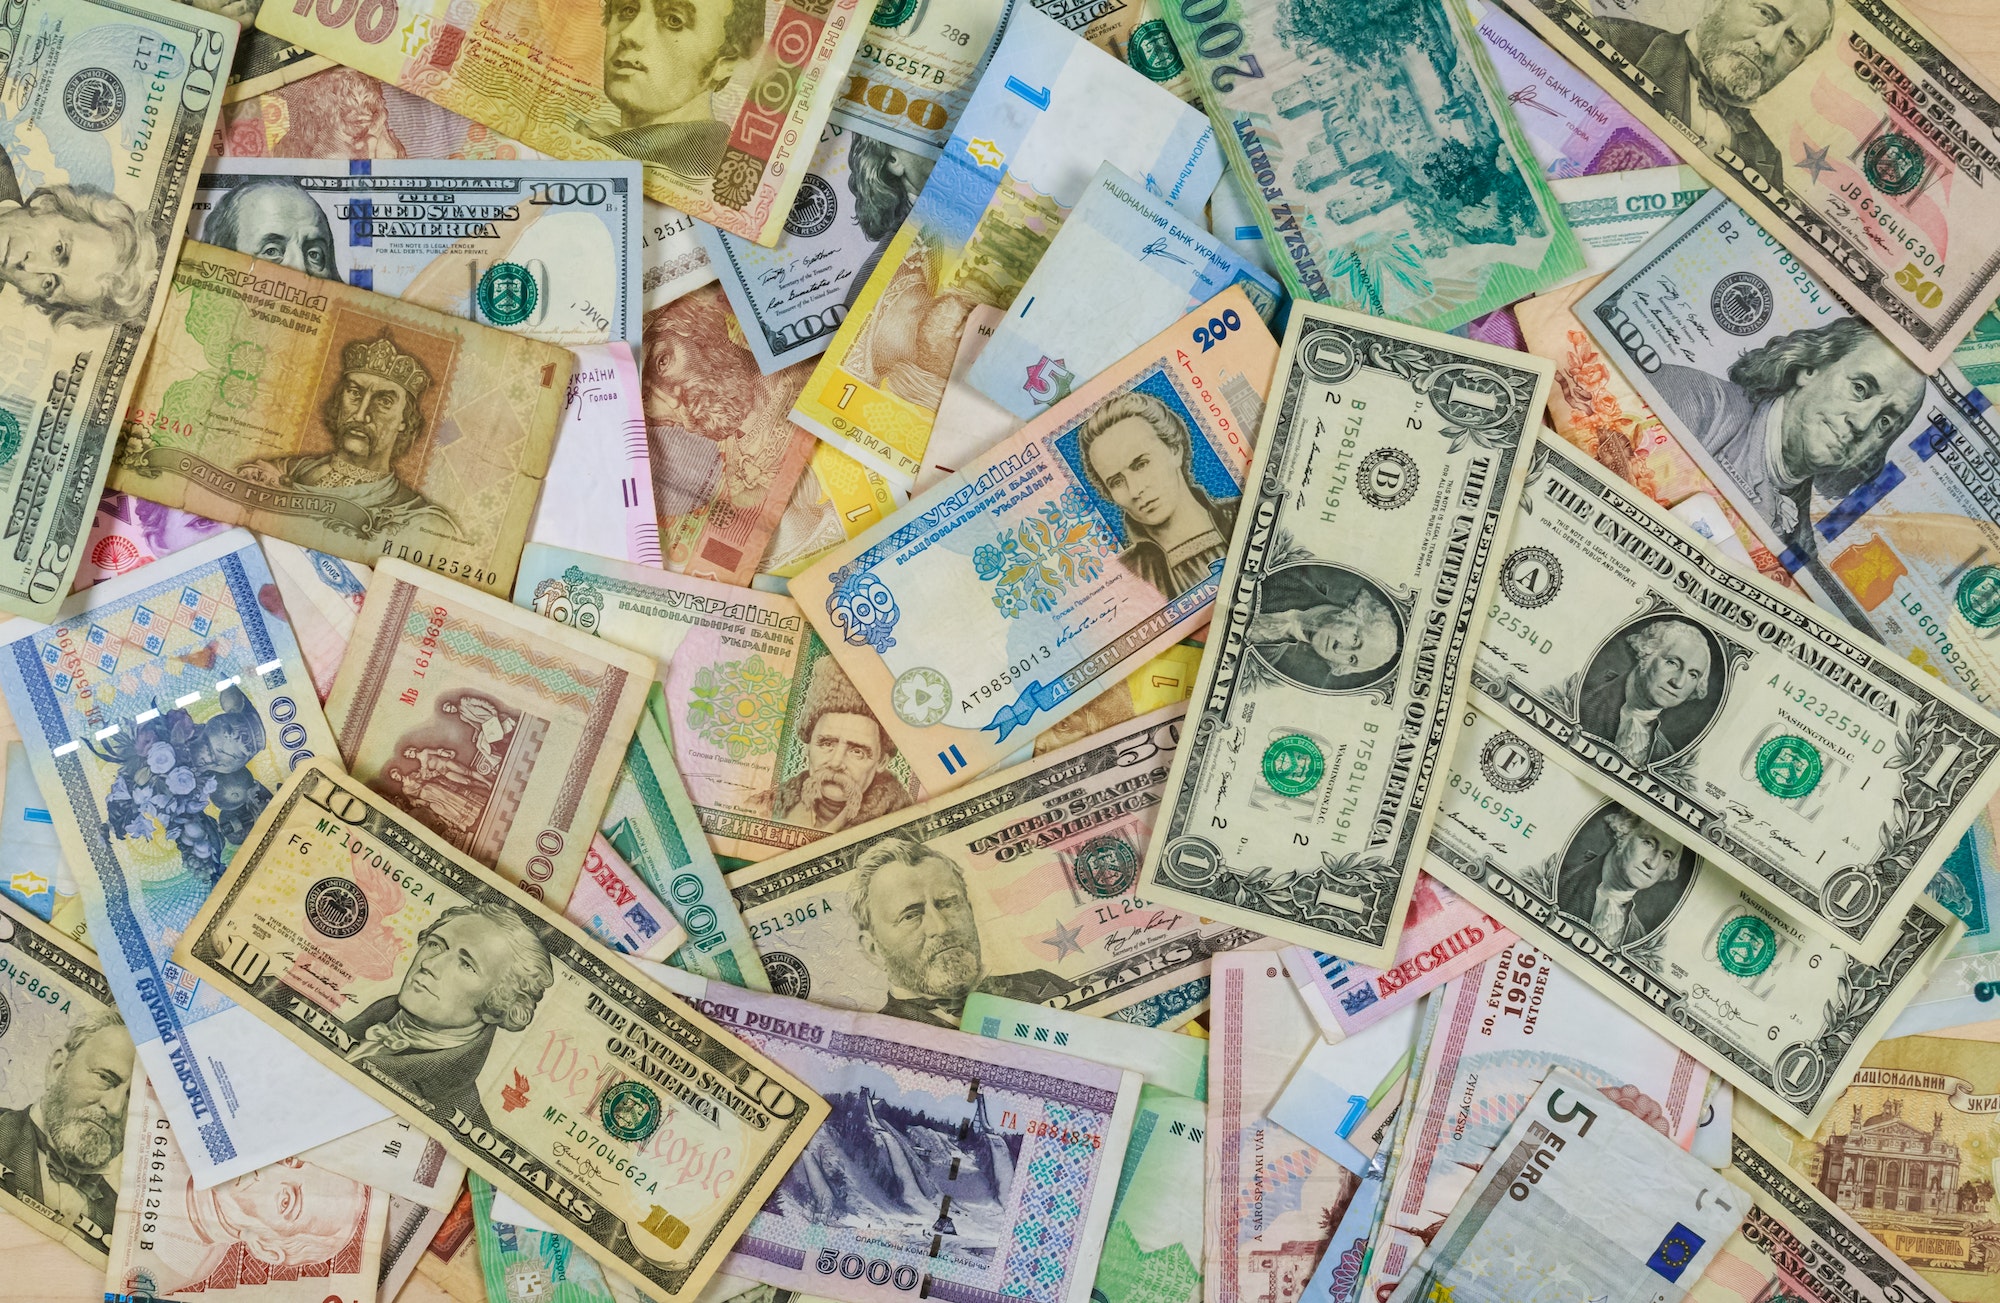 International currencies banknotes from different countries overlapping each other